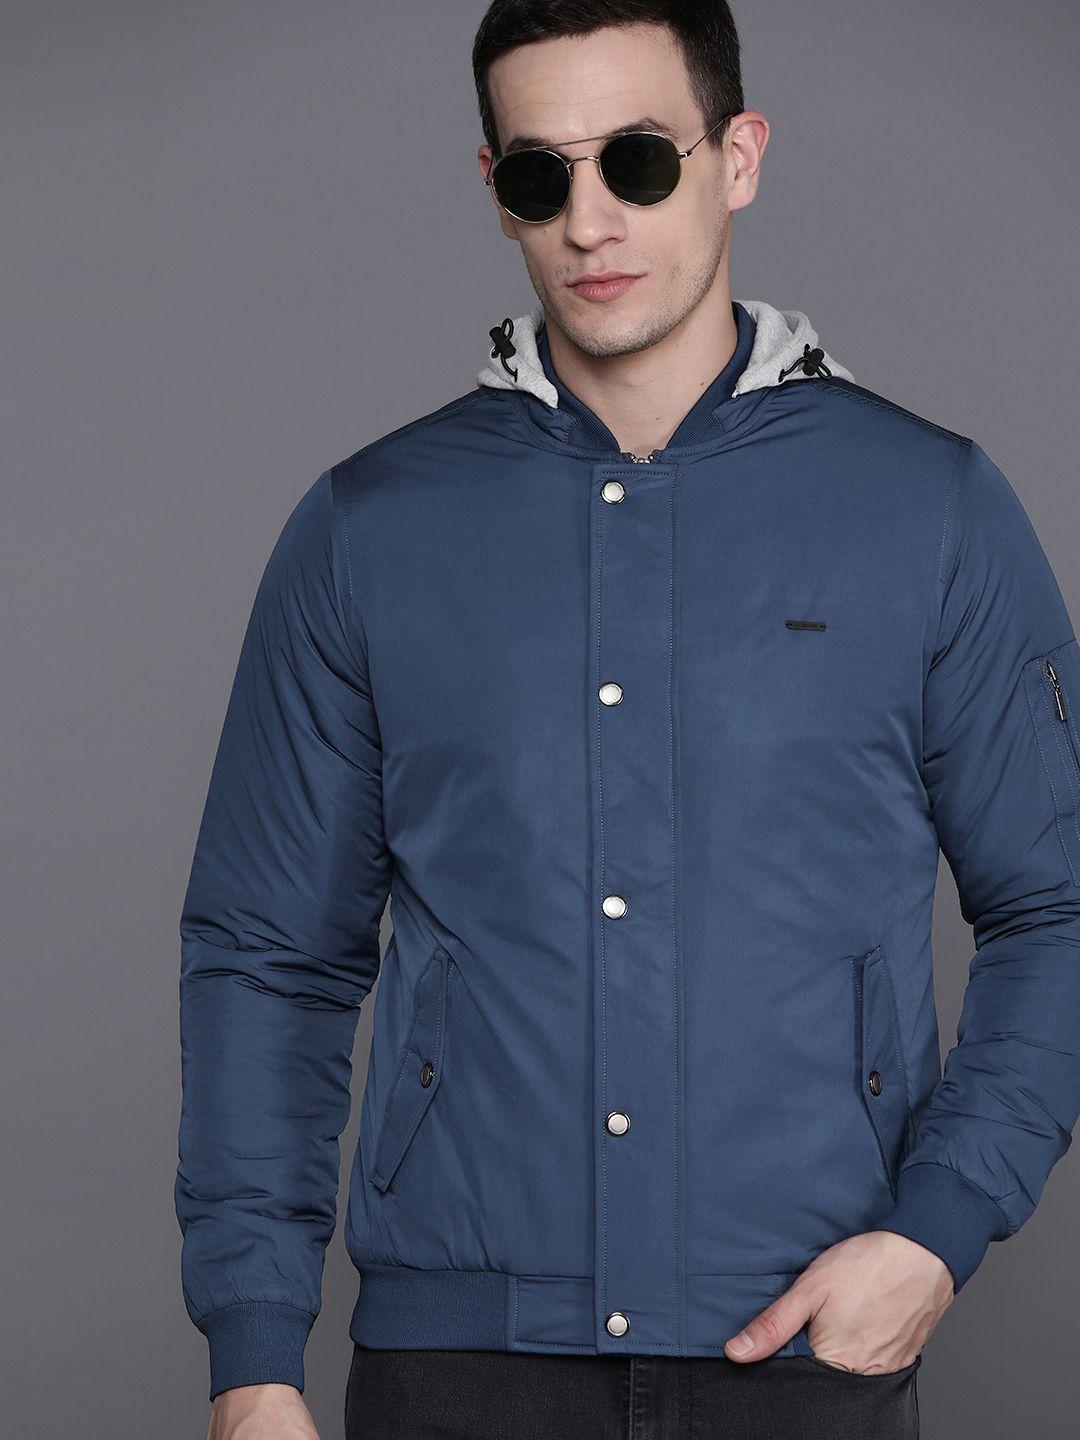 louis philippe jeans bomber jacket